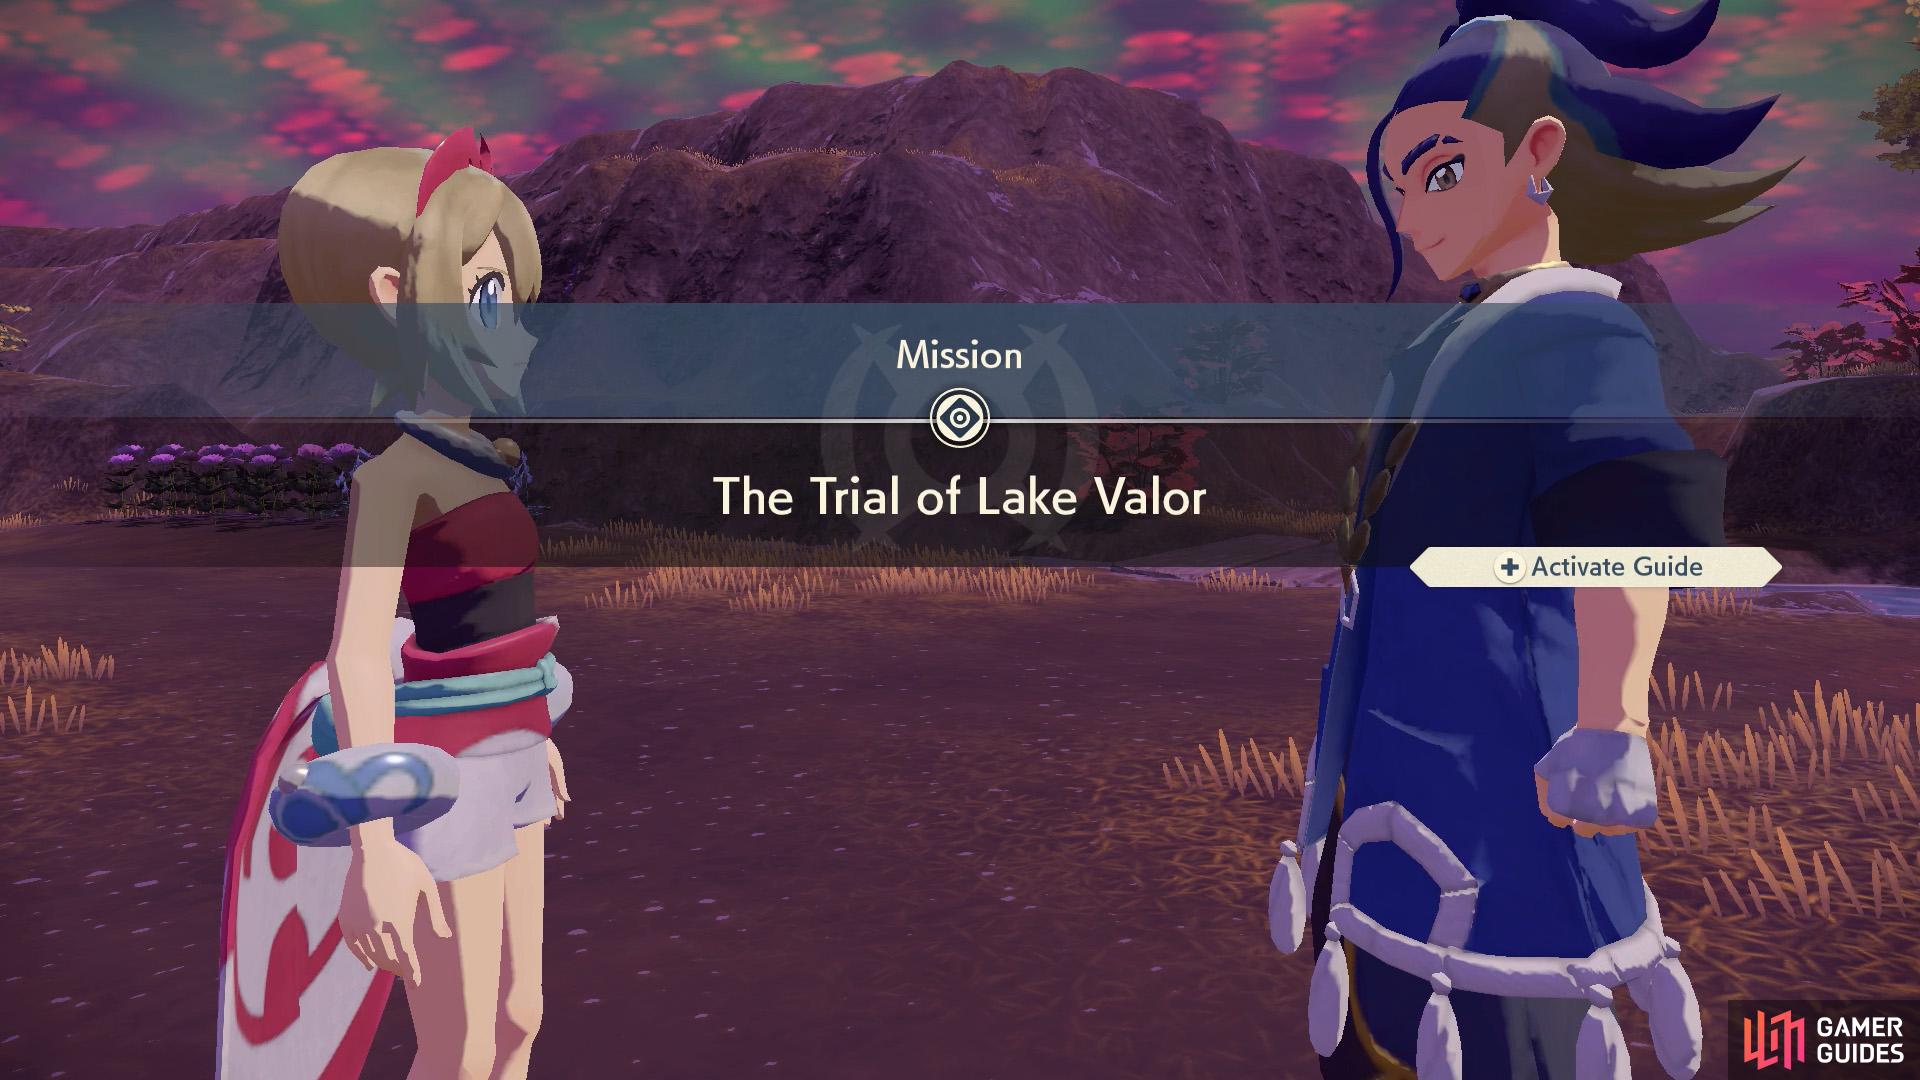 This mission will lead you to Lake Valor.